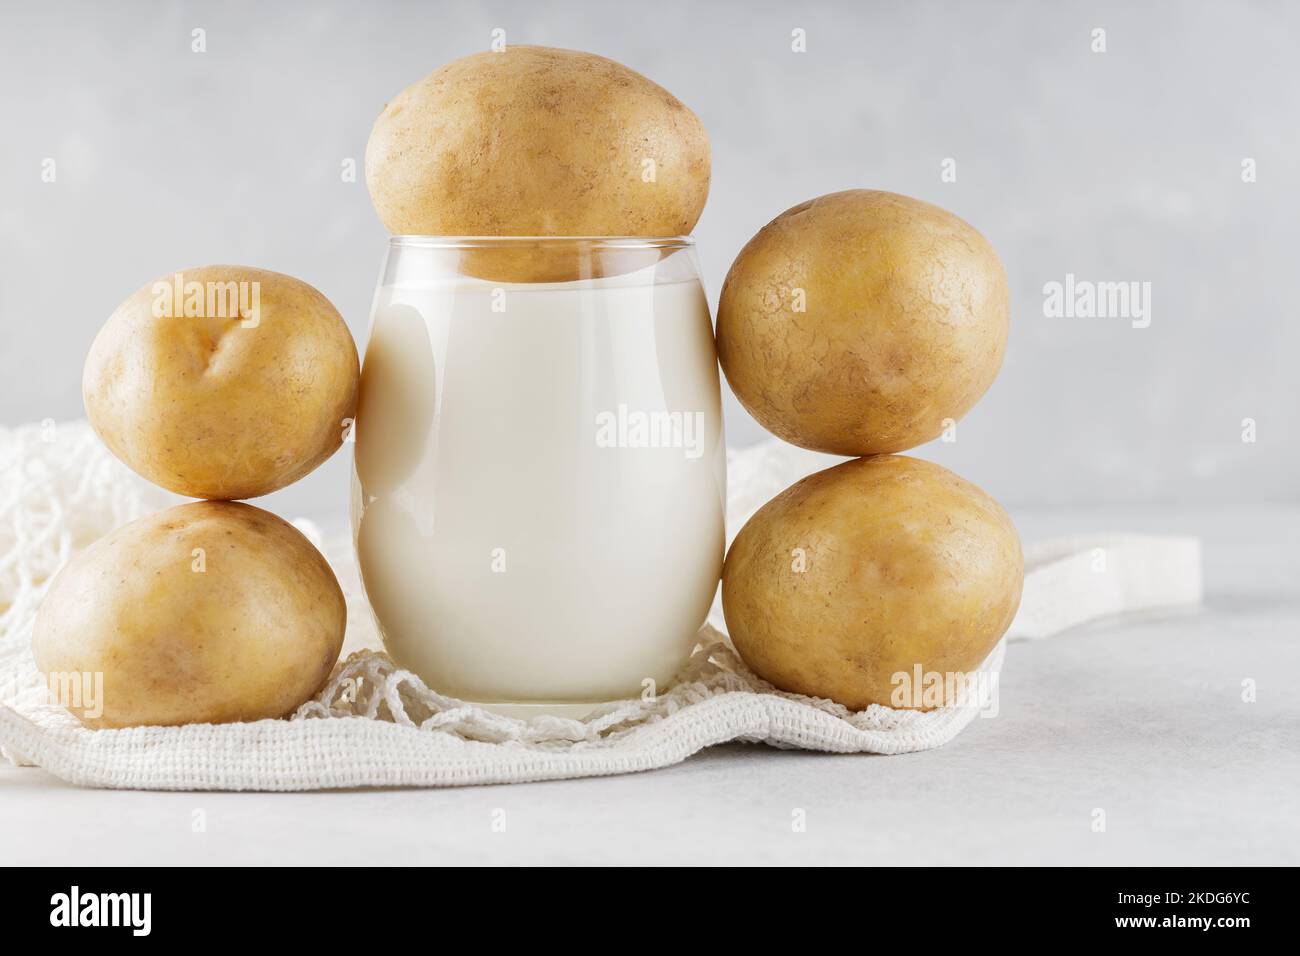 Alternative potato milk in glass and potatoes. Alternative non dairy drink and string bag. Vegan potato milk and sustainable lifestyle concept Stock Photo